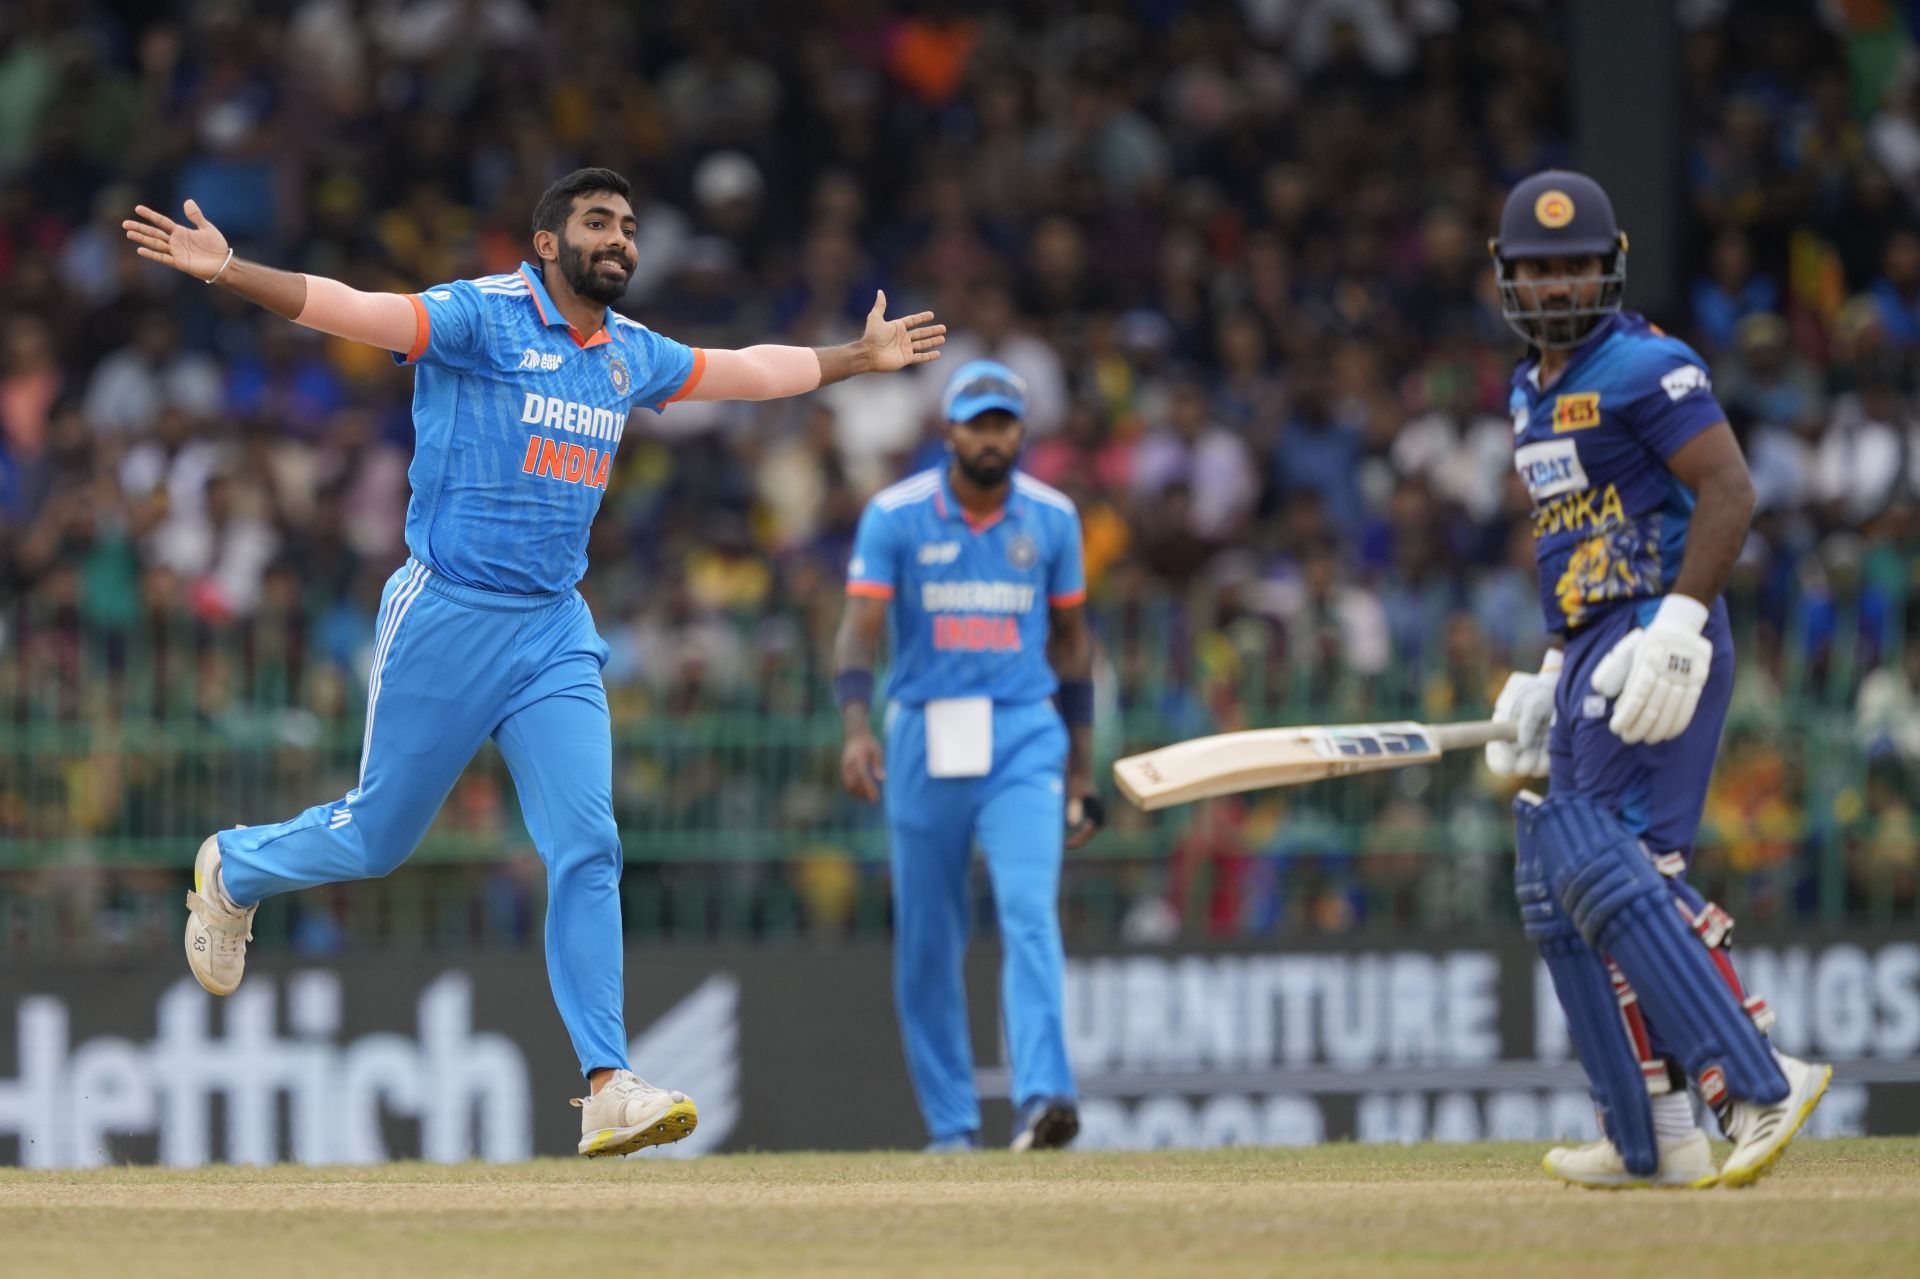 Jasprit Bumrah could be rested for the second ODI